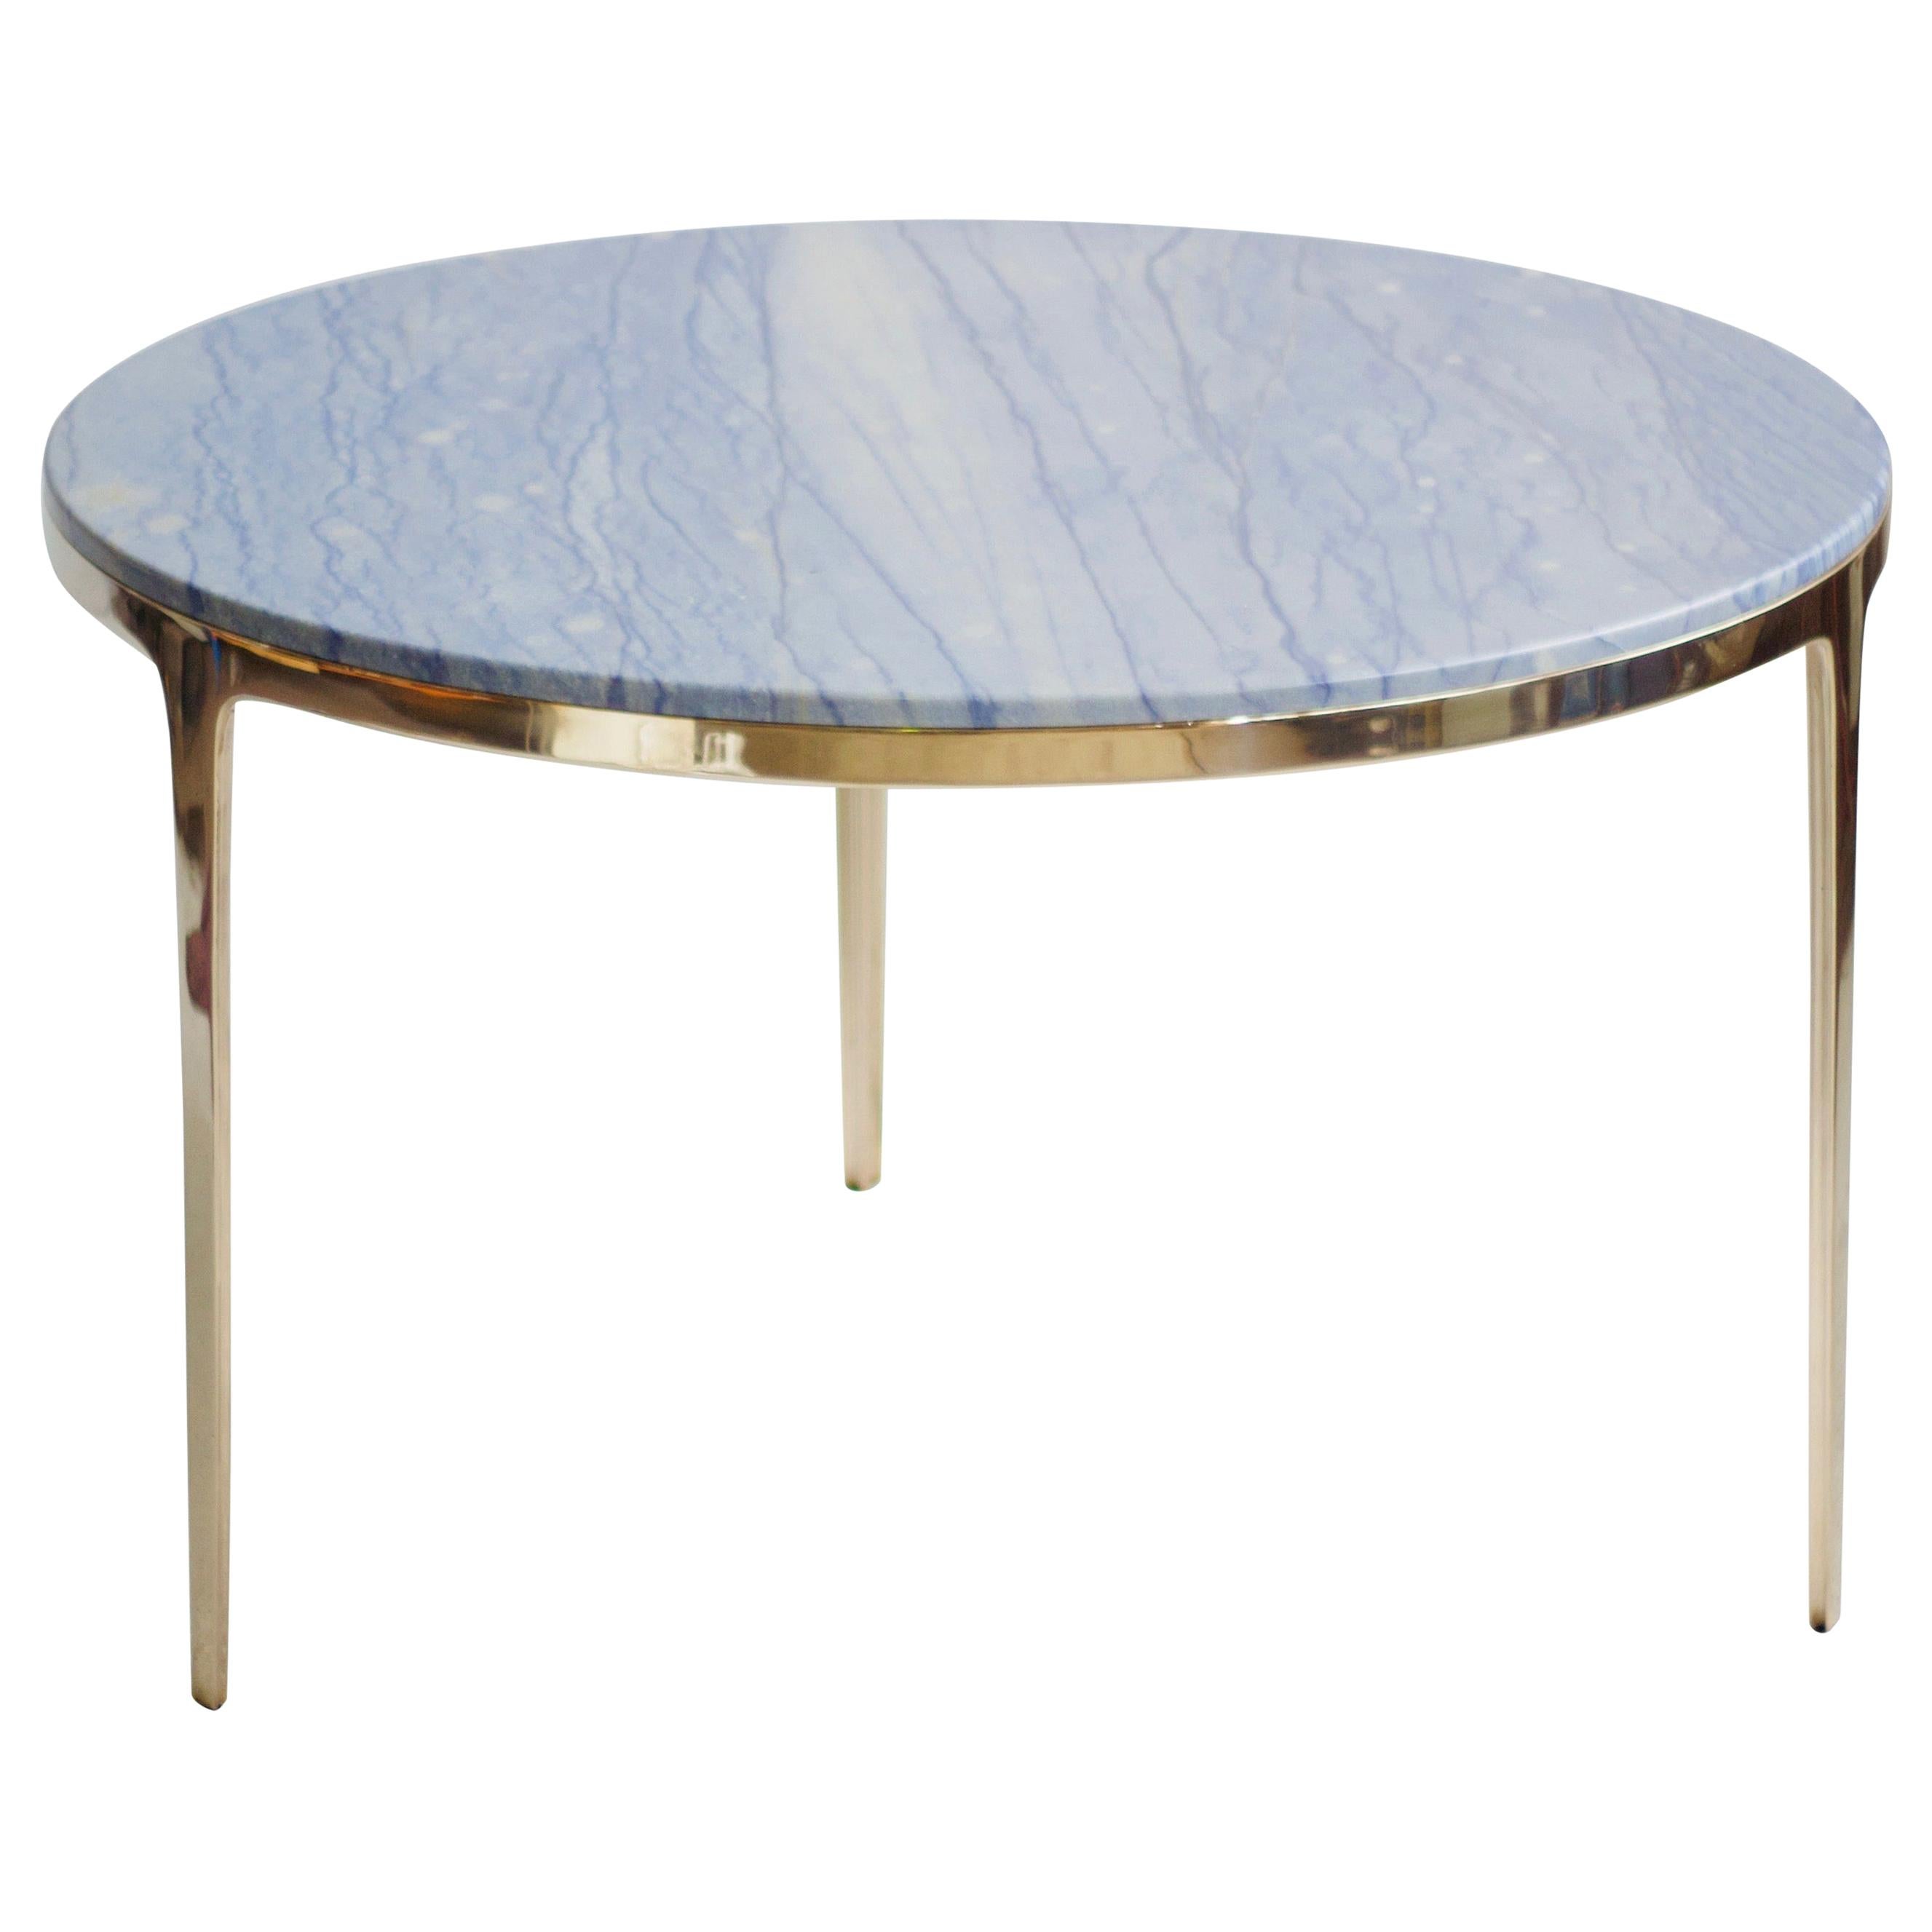 Barbera 'Bronze' Round Table, Modern Solid Bronze Base, Stone Top-Made to order